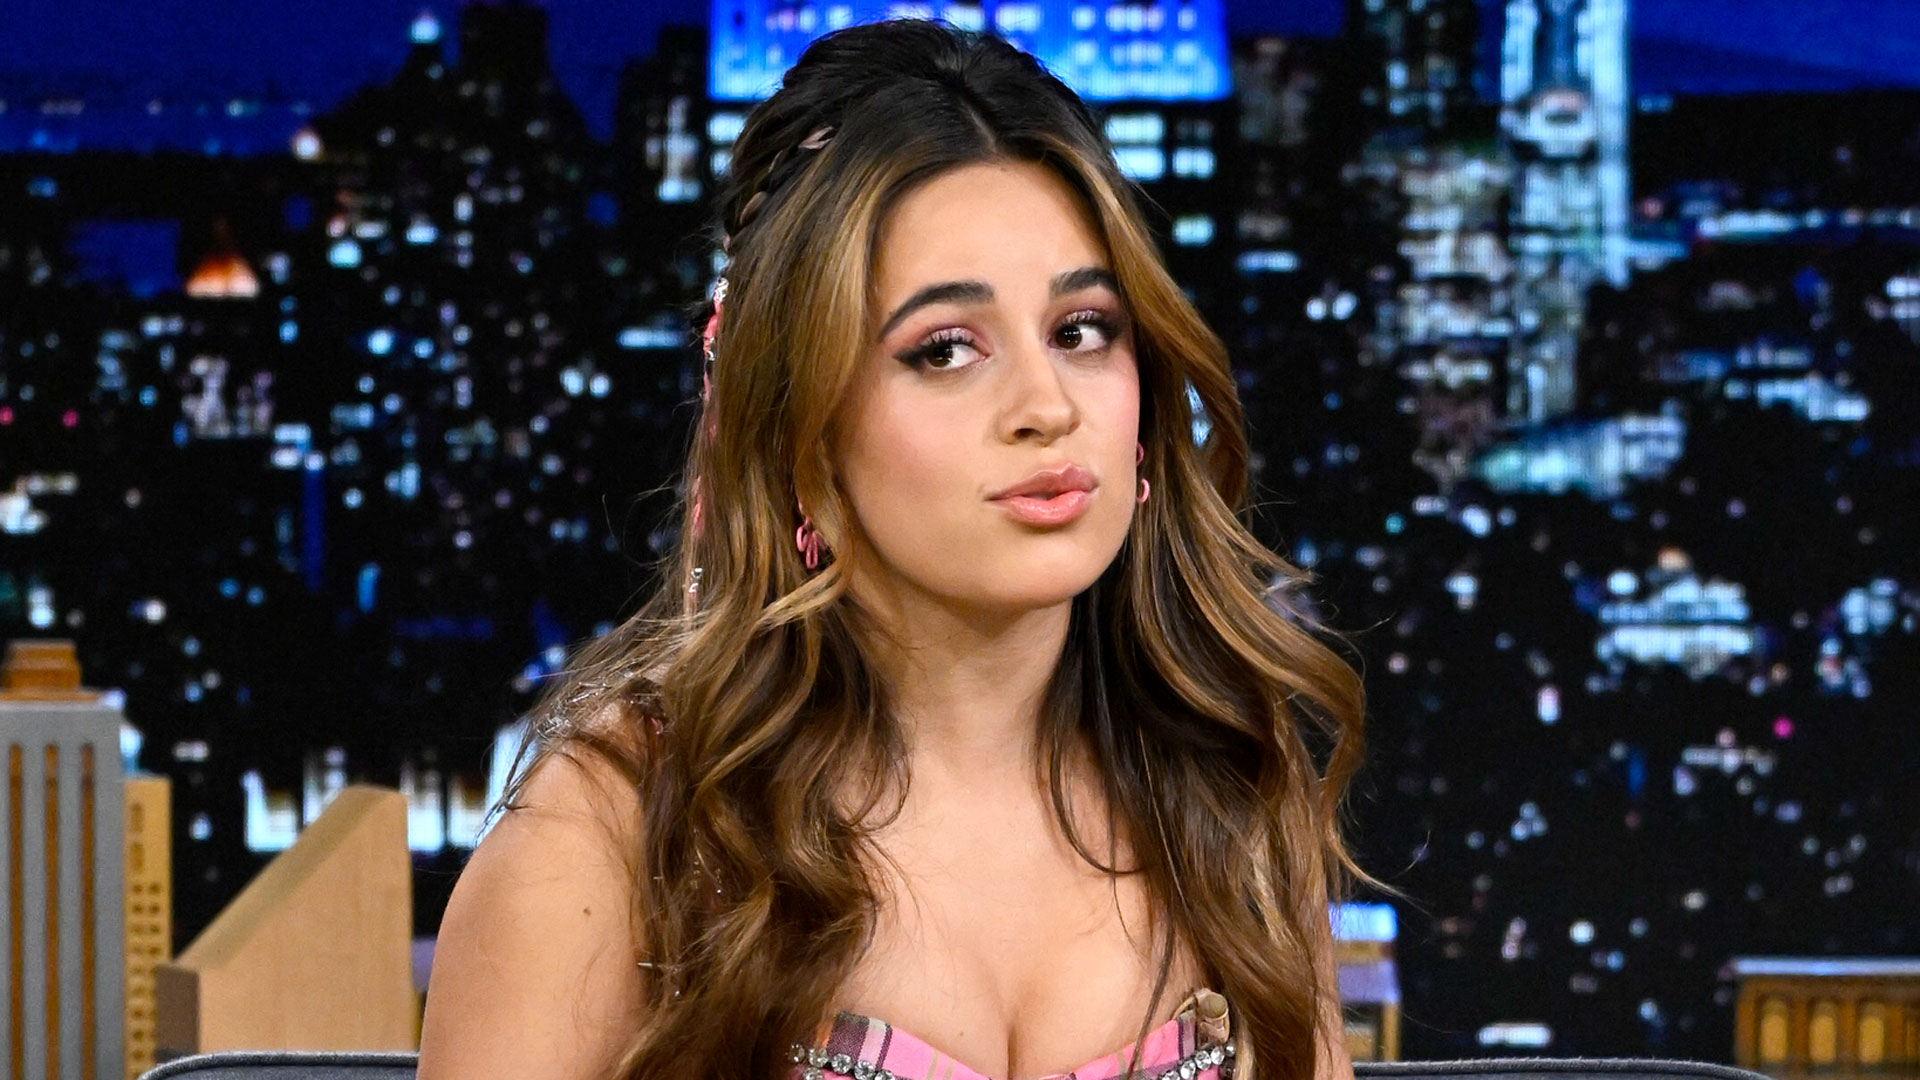 Watch The Tonight Show Starring Jimmy Fallon Highlight Camila Cabello Shares Footage Of A UFO